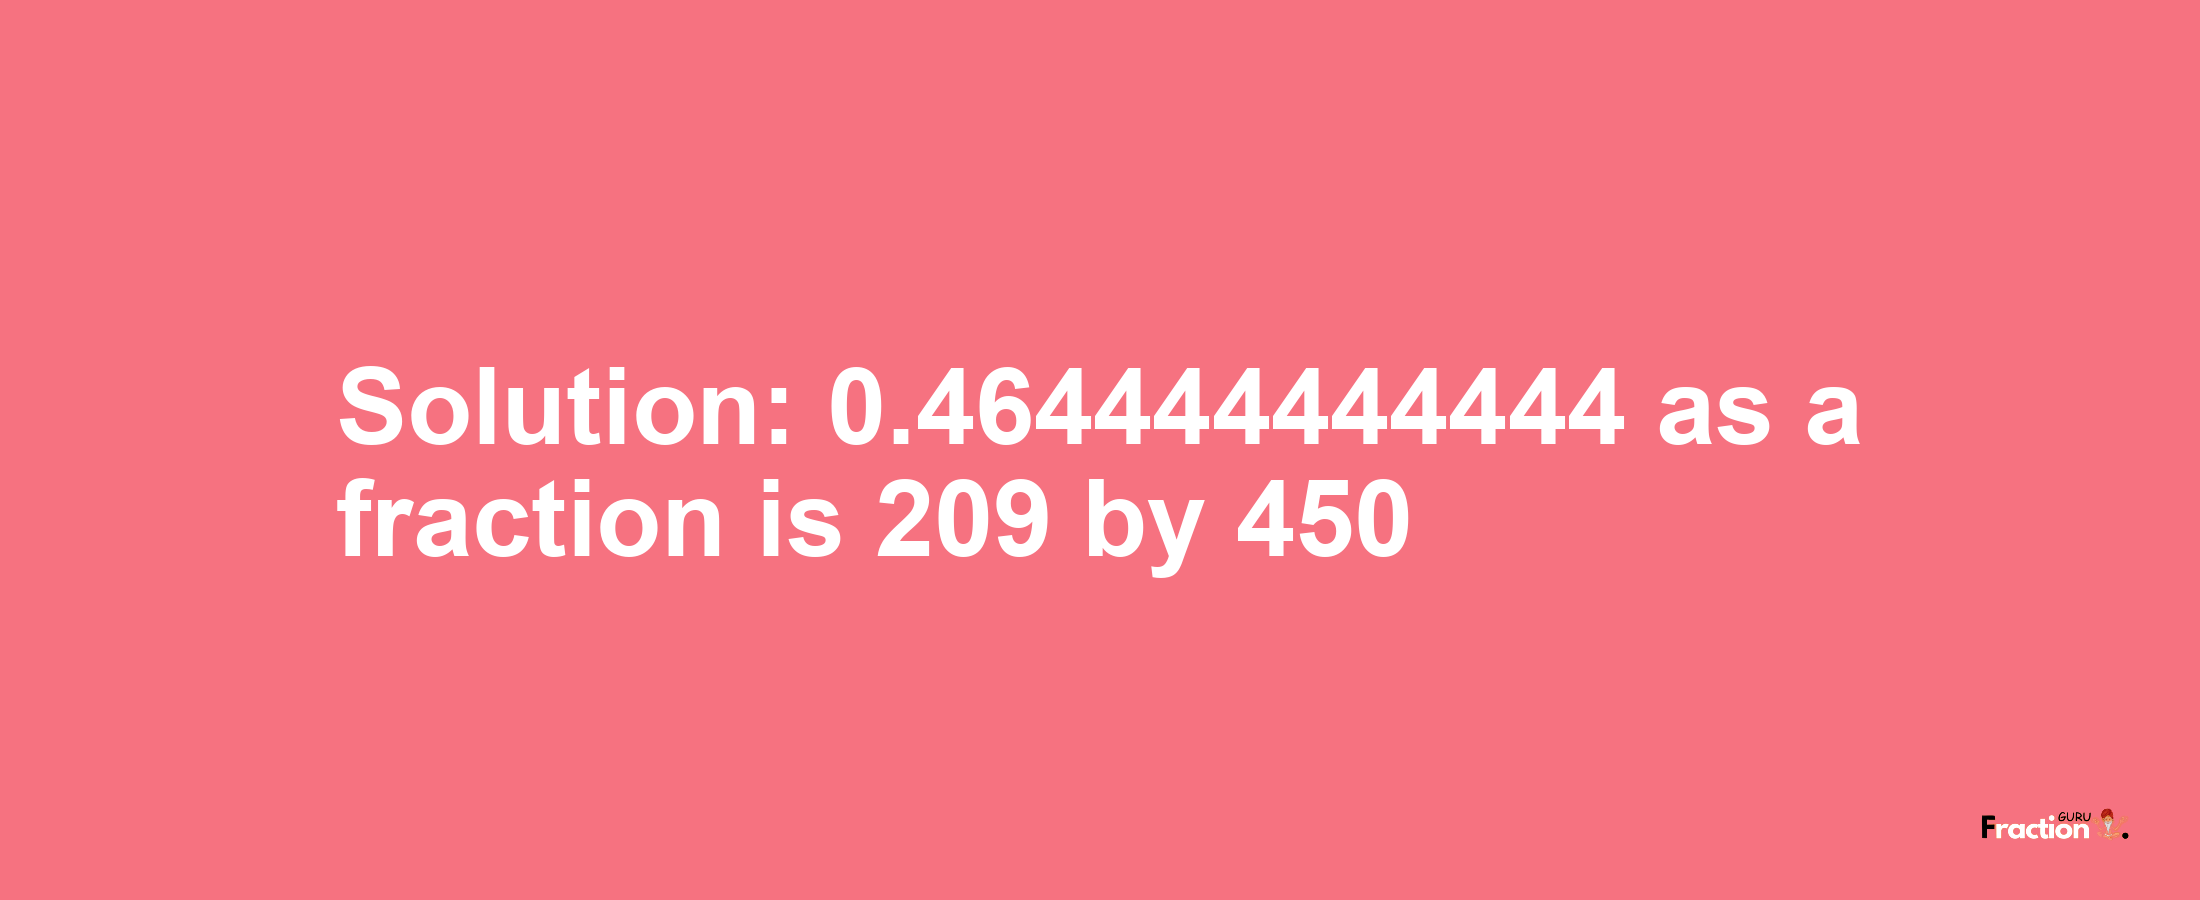 Solution:0.464444444444 as a fraction is 209/450